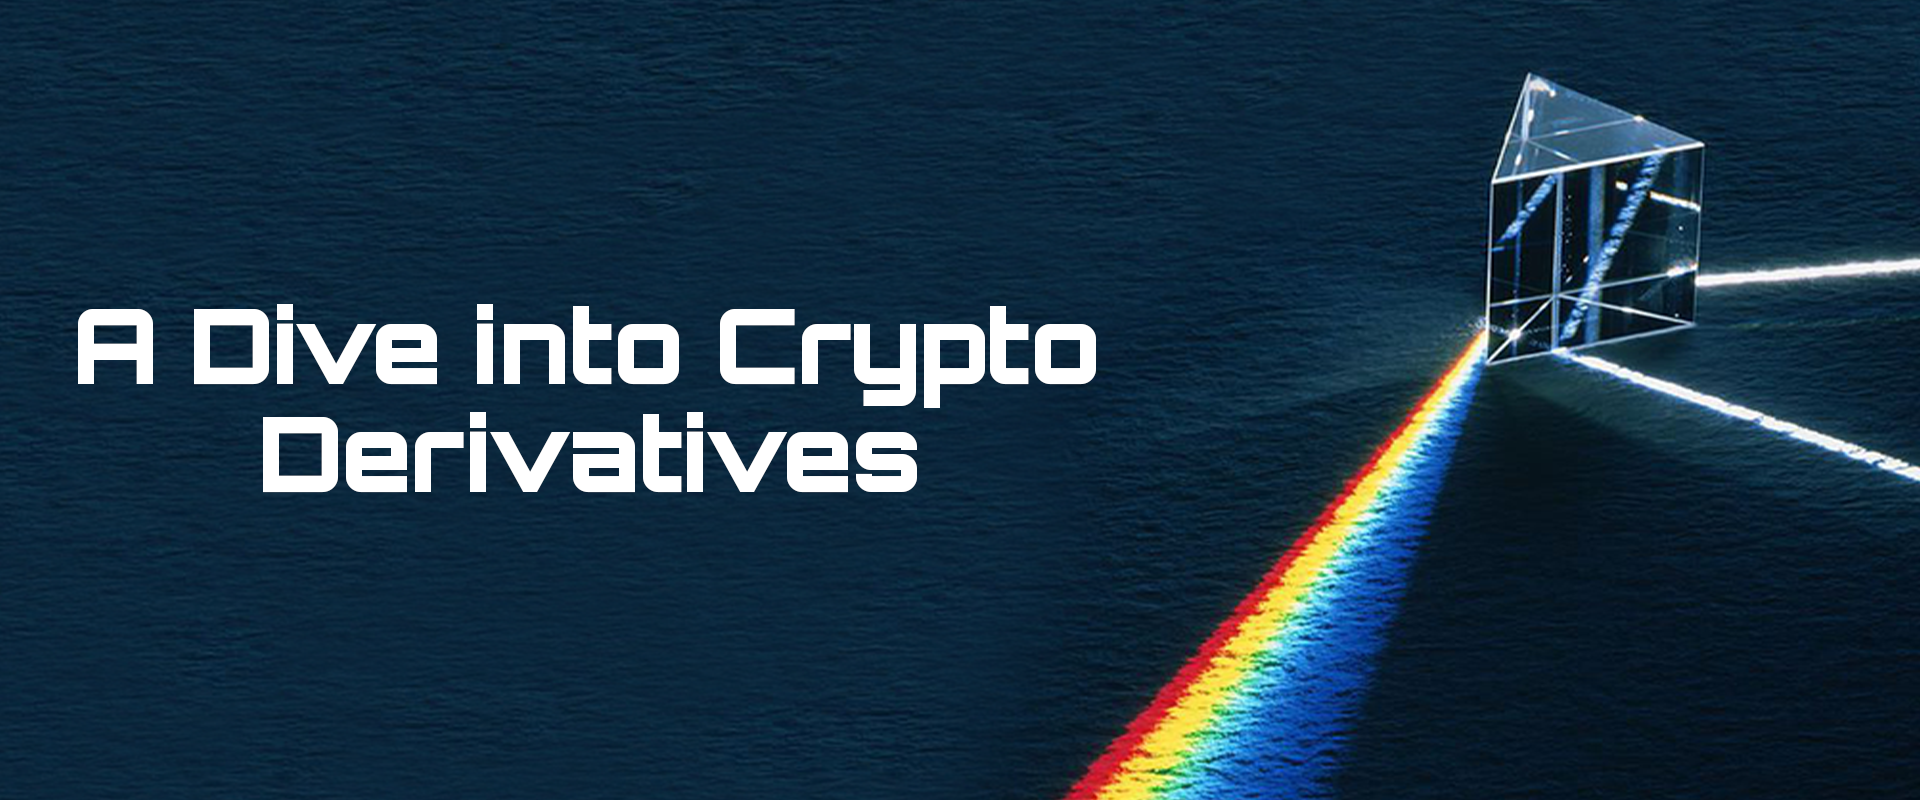 Read more about the article A Dive into Crypto Derivatives: Perps, Open Interest, Funding, and Price Action